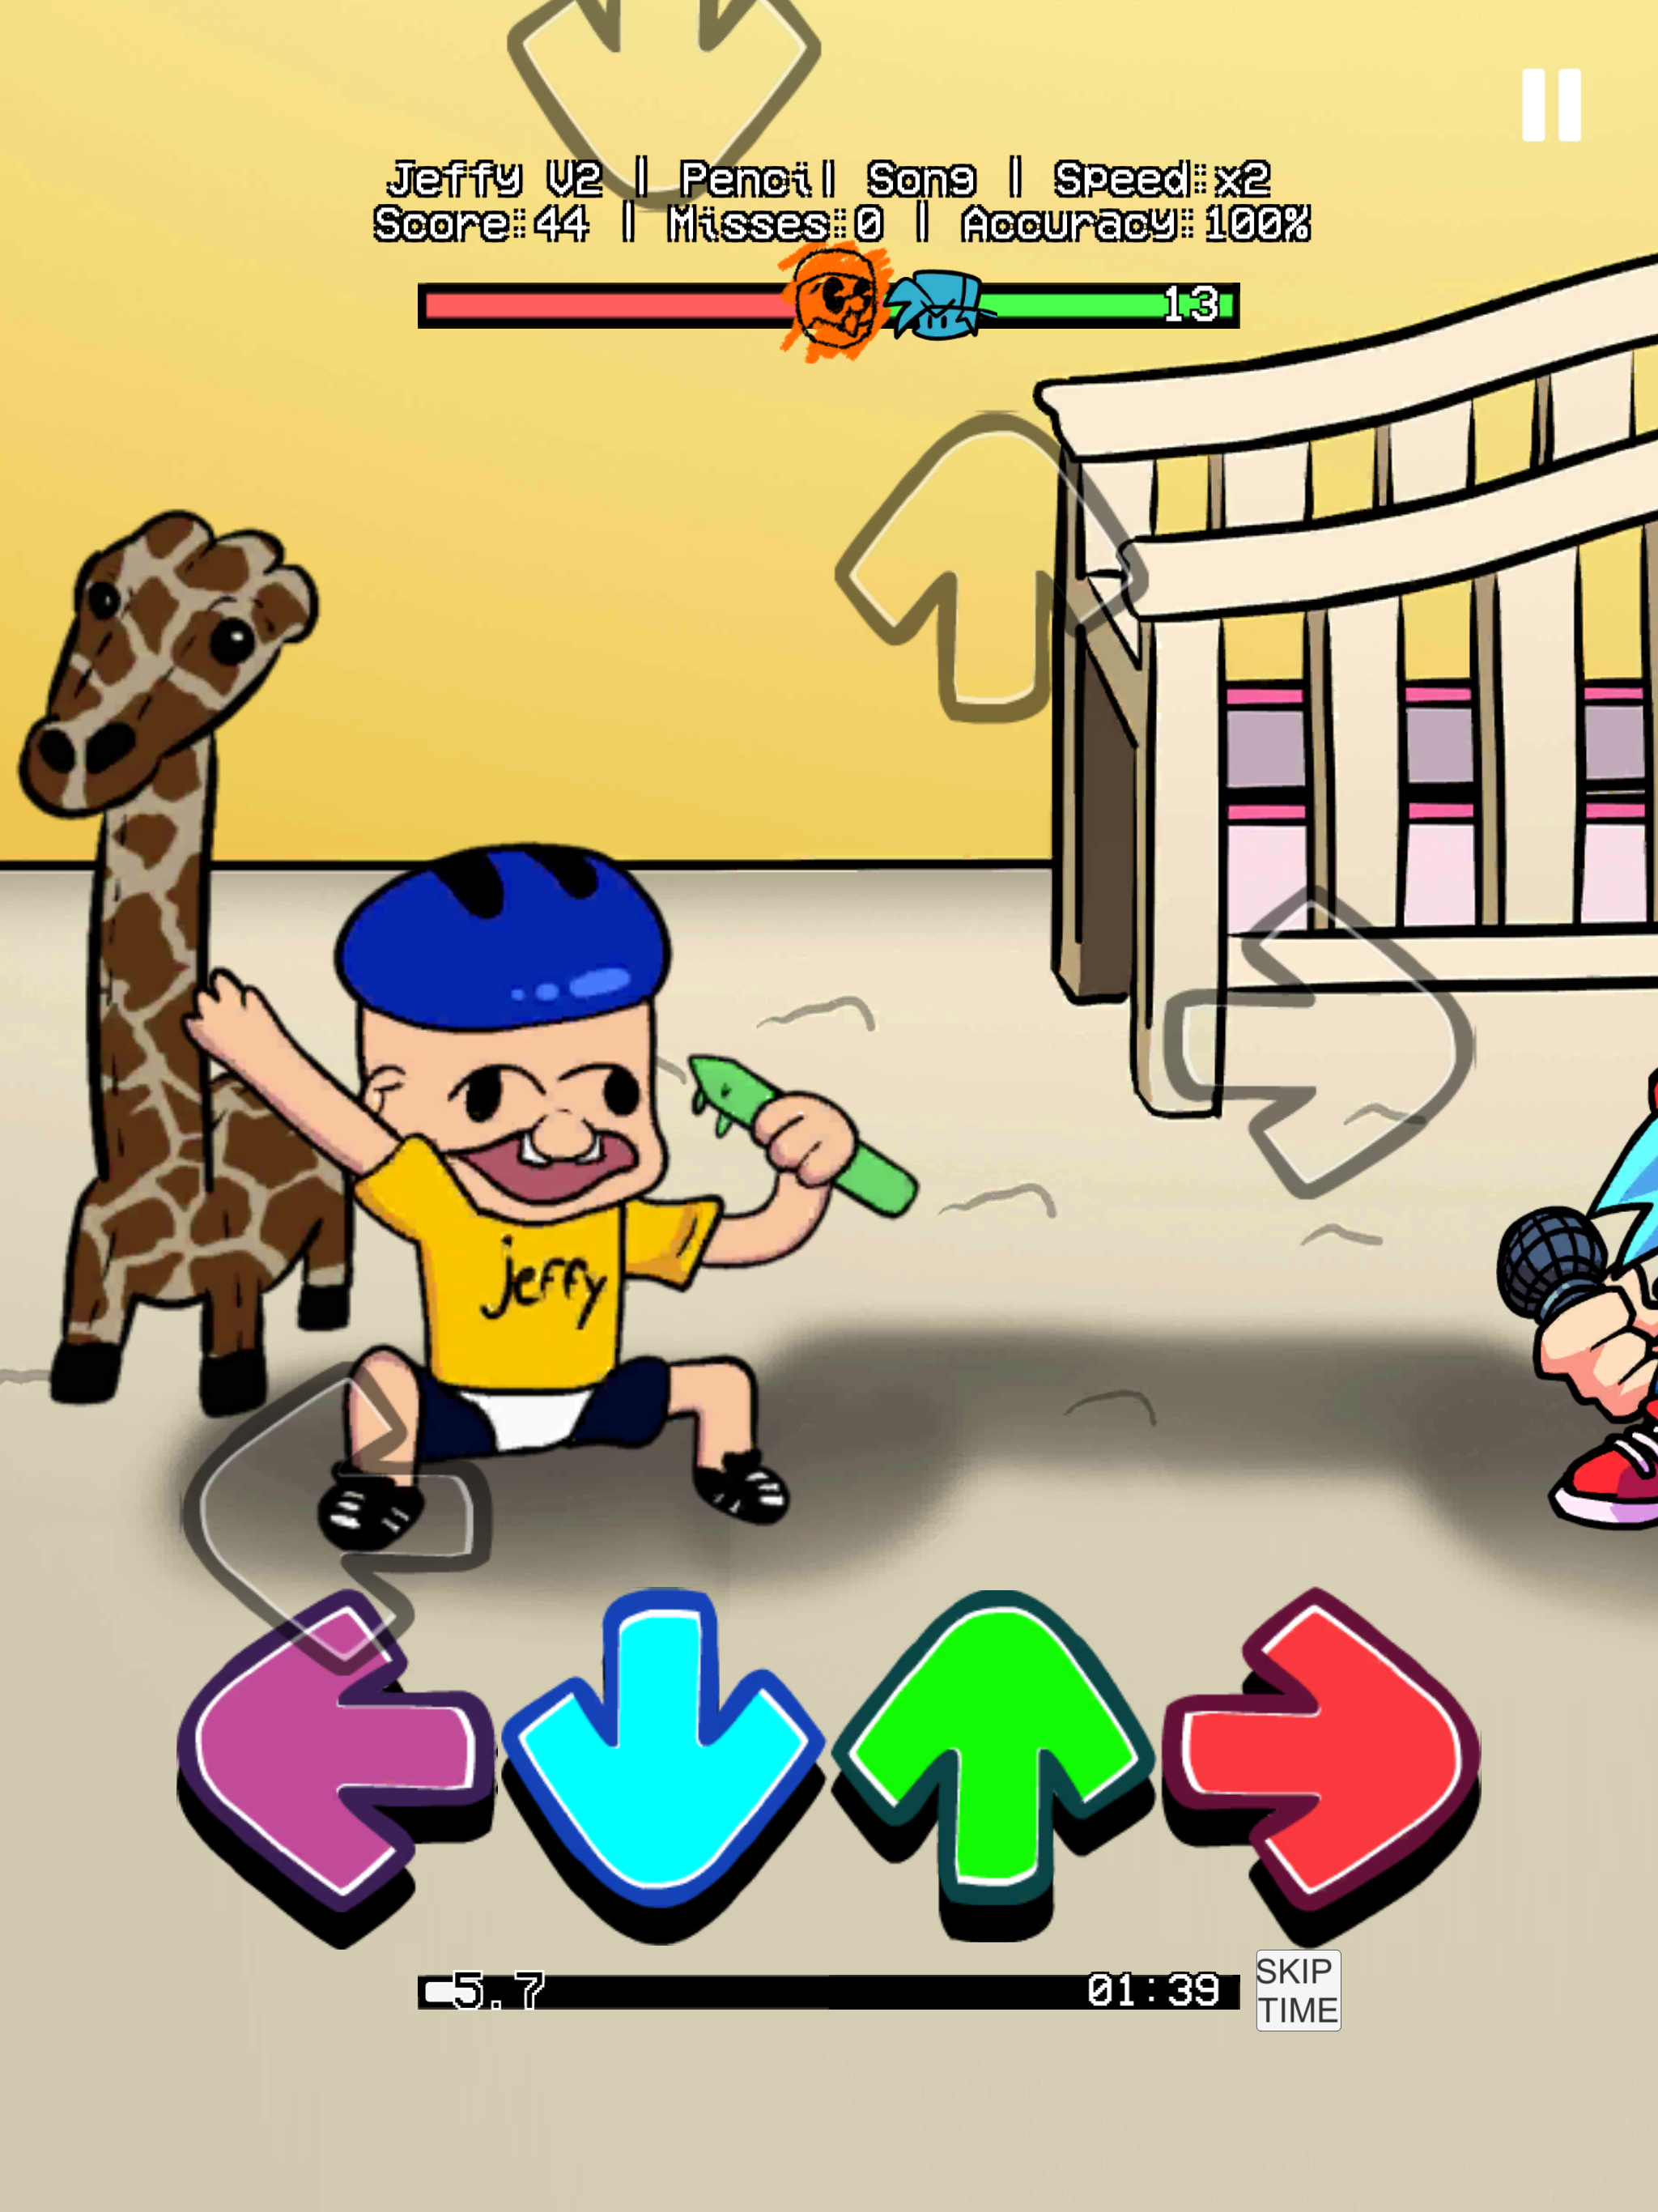 FNF Papa Louie VS Friday Mod APK for Android Download